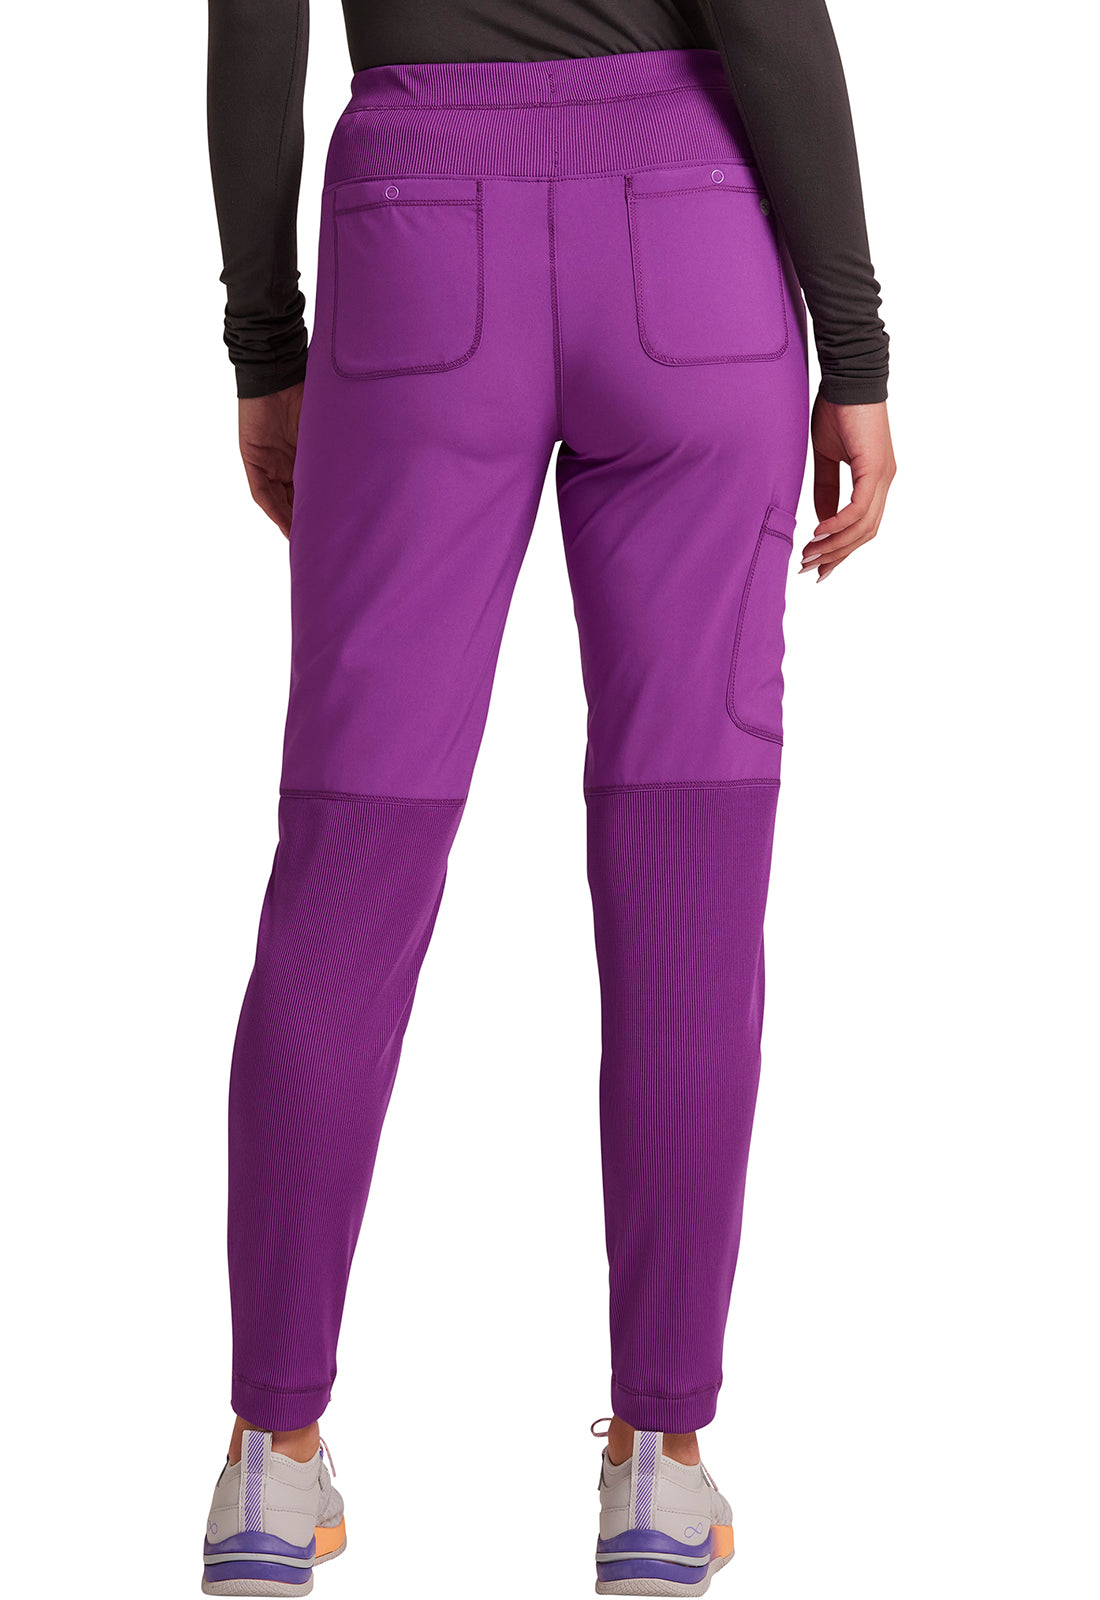 High-Waist Tapered Pant with Elastic Back